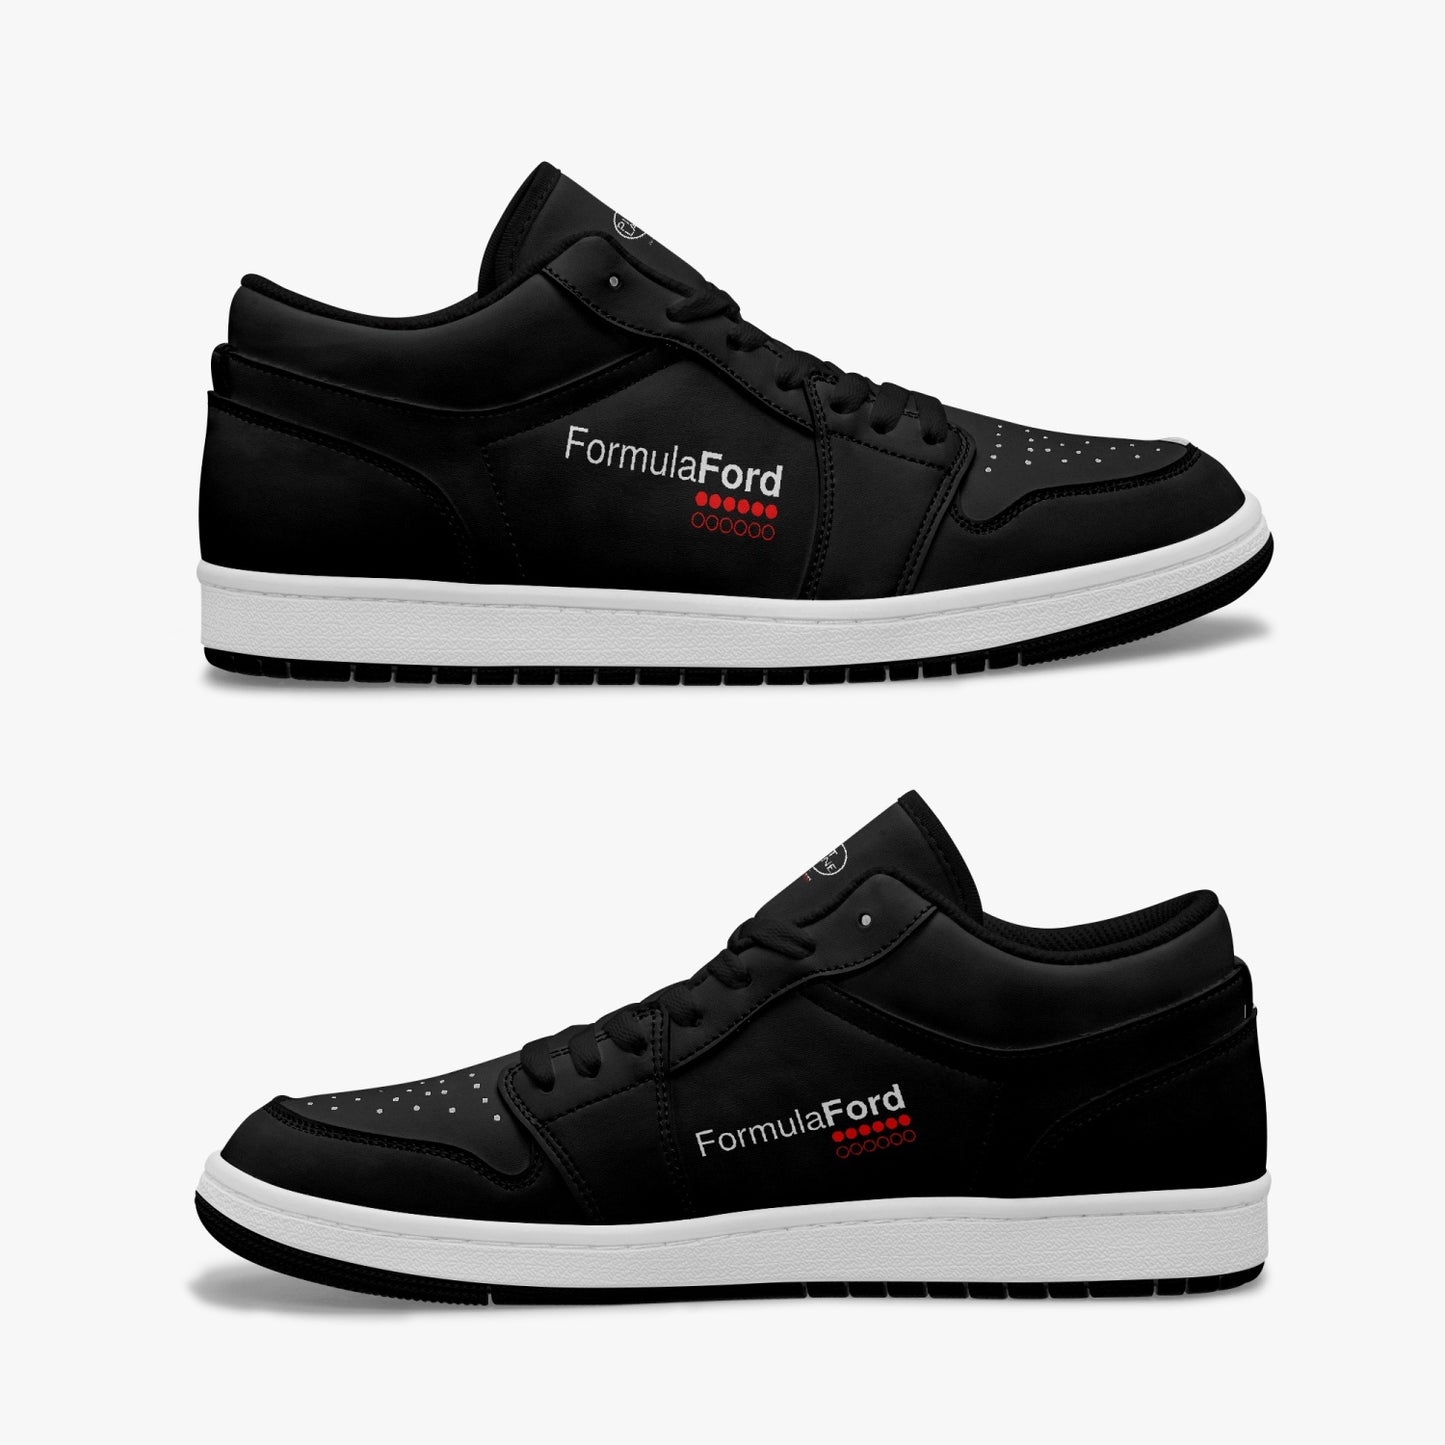 FORMULA FORD Official Low-Top Leather track shoe - full carbon